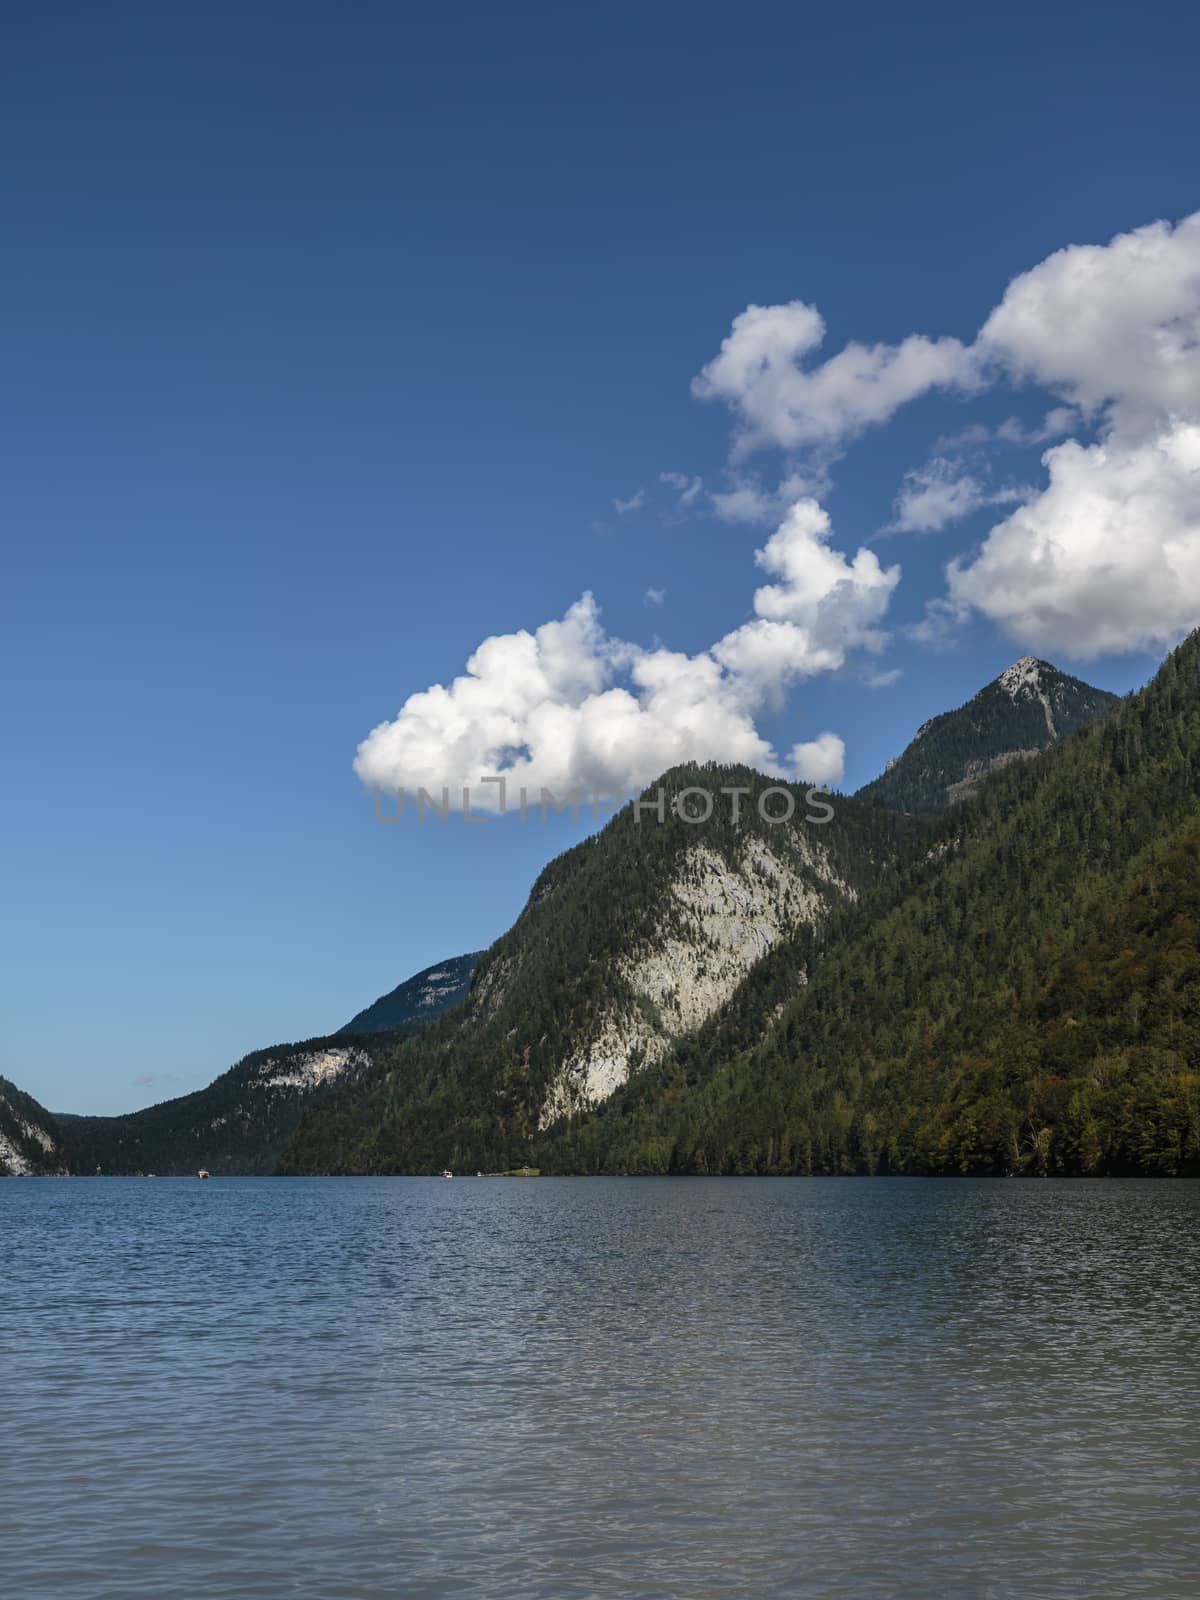 view over Koenigssee to densely wooded hills an mountains, from the sun illuminated rocks, clear blue sky with large white clouds